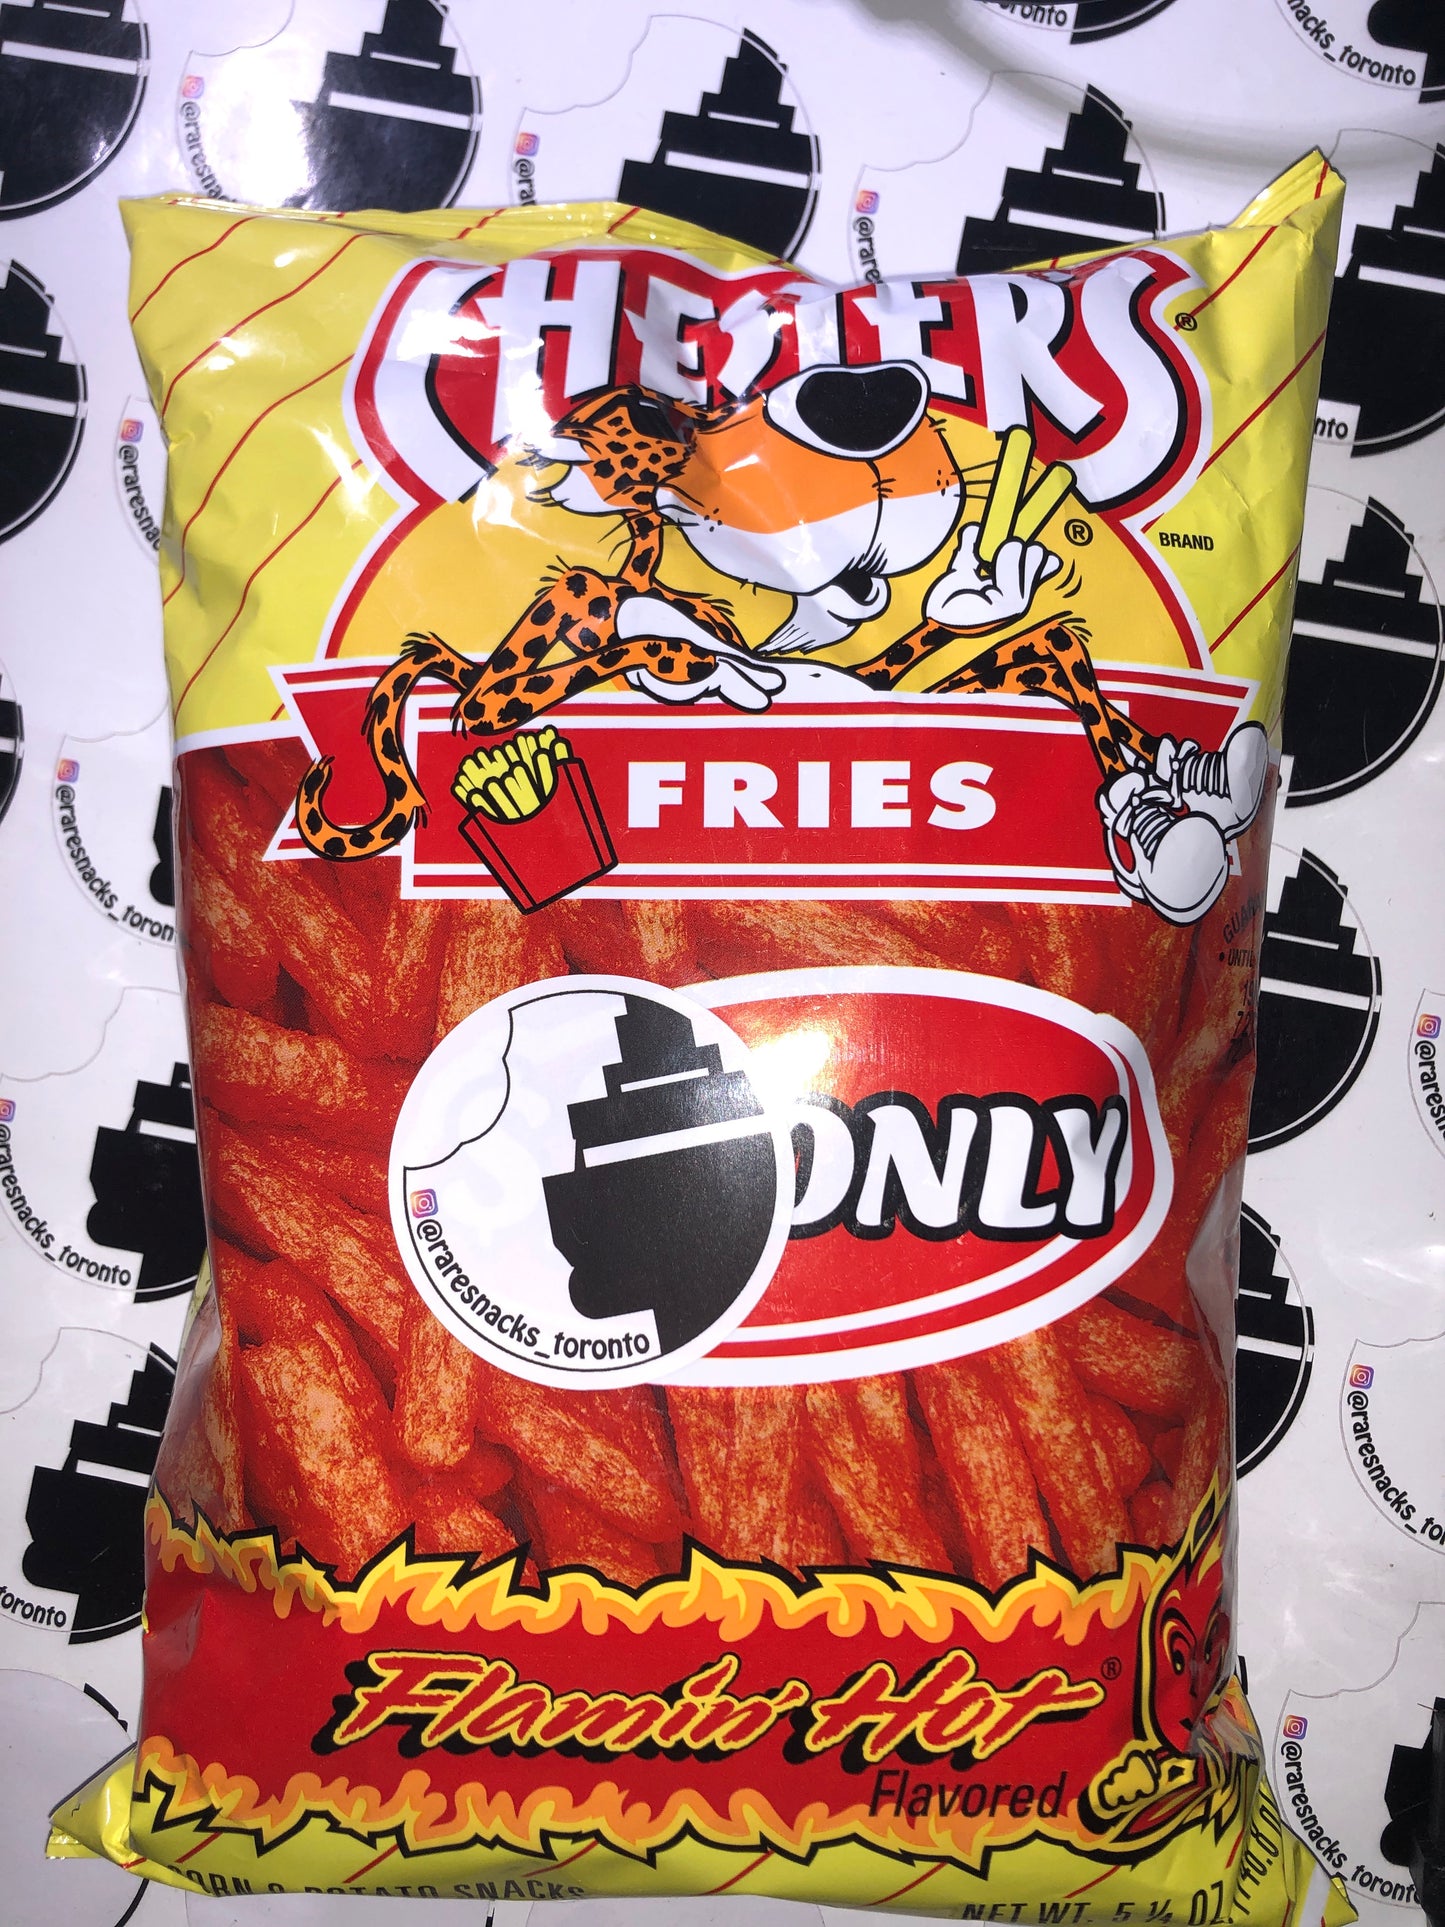 Chester’s Flaming Hot Fries